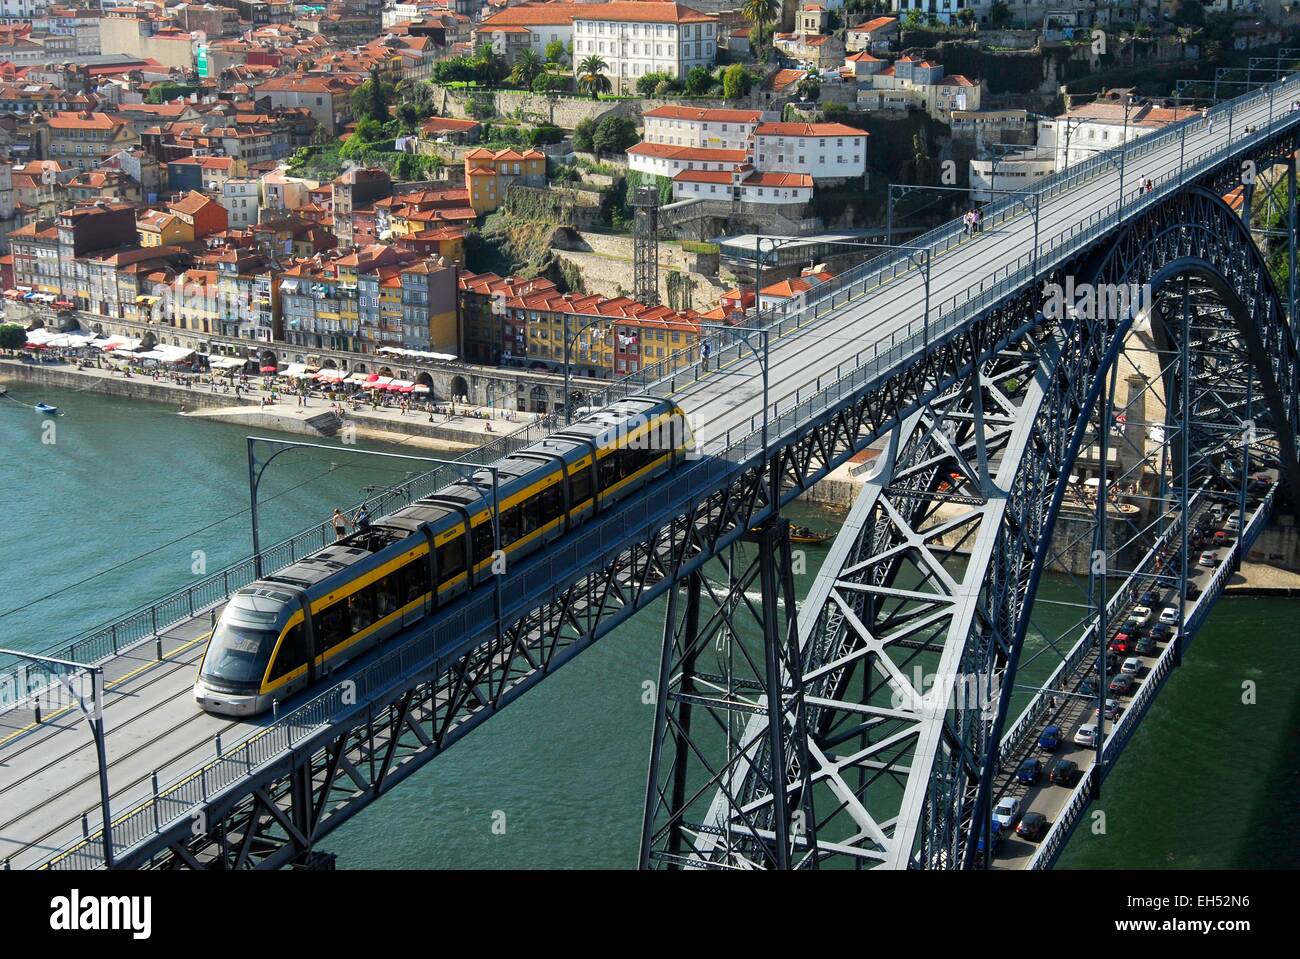 Portugal, North Region, Porto, historical center listed as World Heritage by UNESCO, streetcar on the Eiffel style Dom Luis I bridge over the Douro River and Ribeira cais Stock Photo